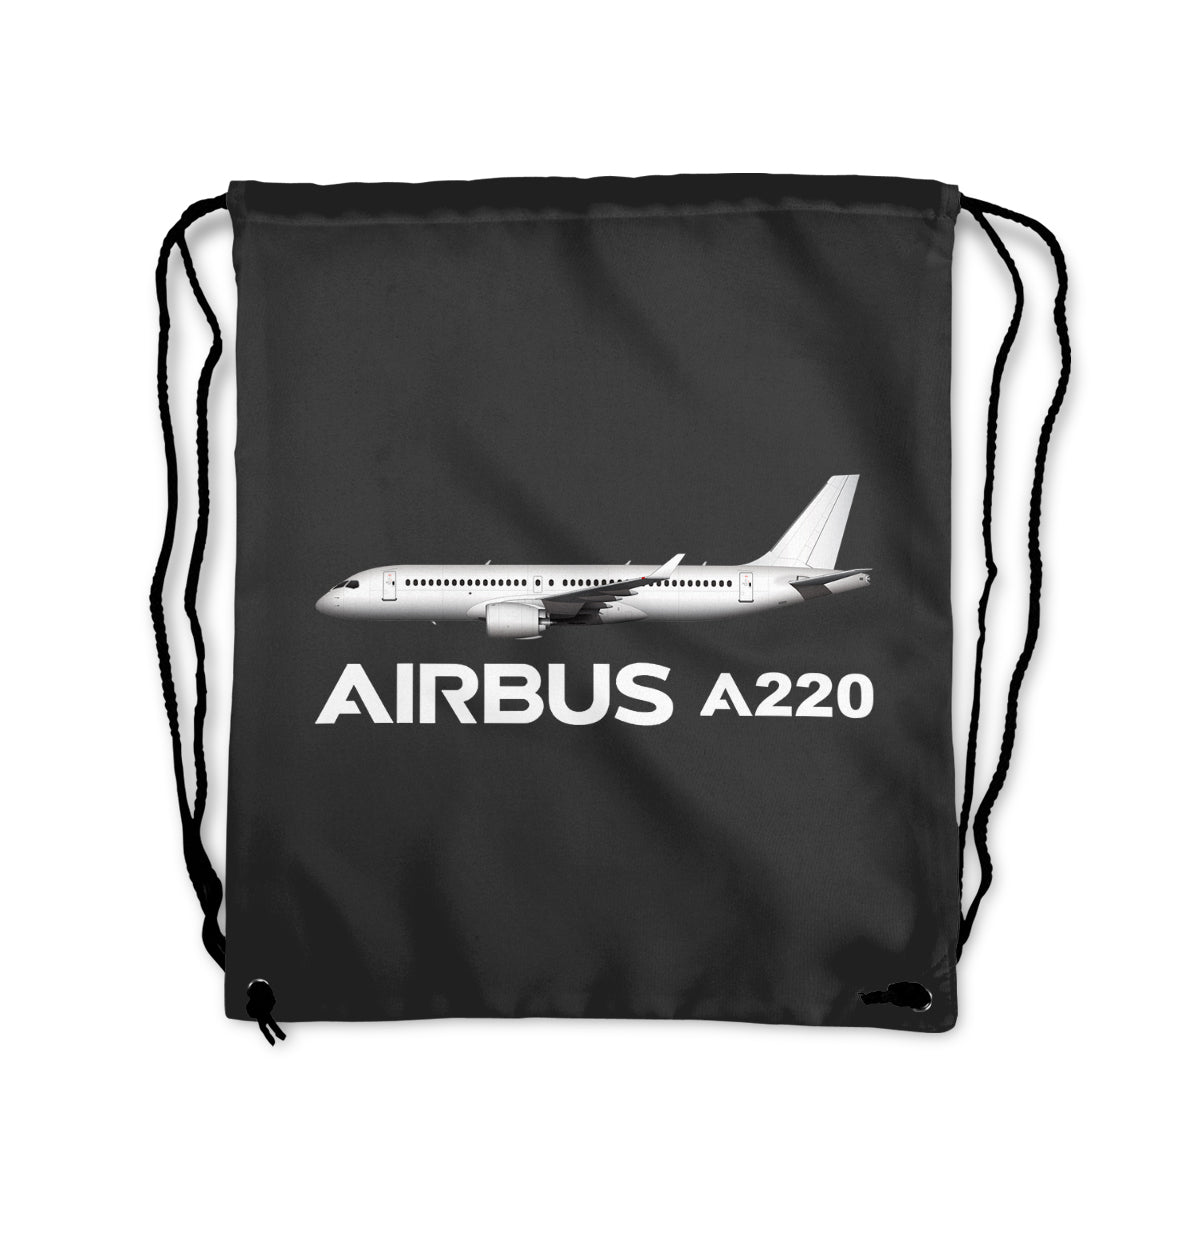 The Airbus A220 Designed Drawstring Bags